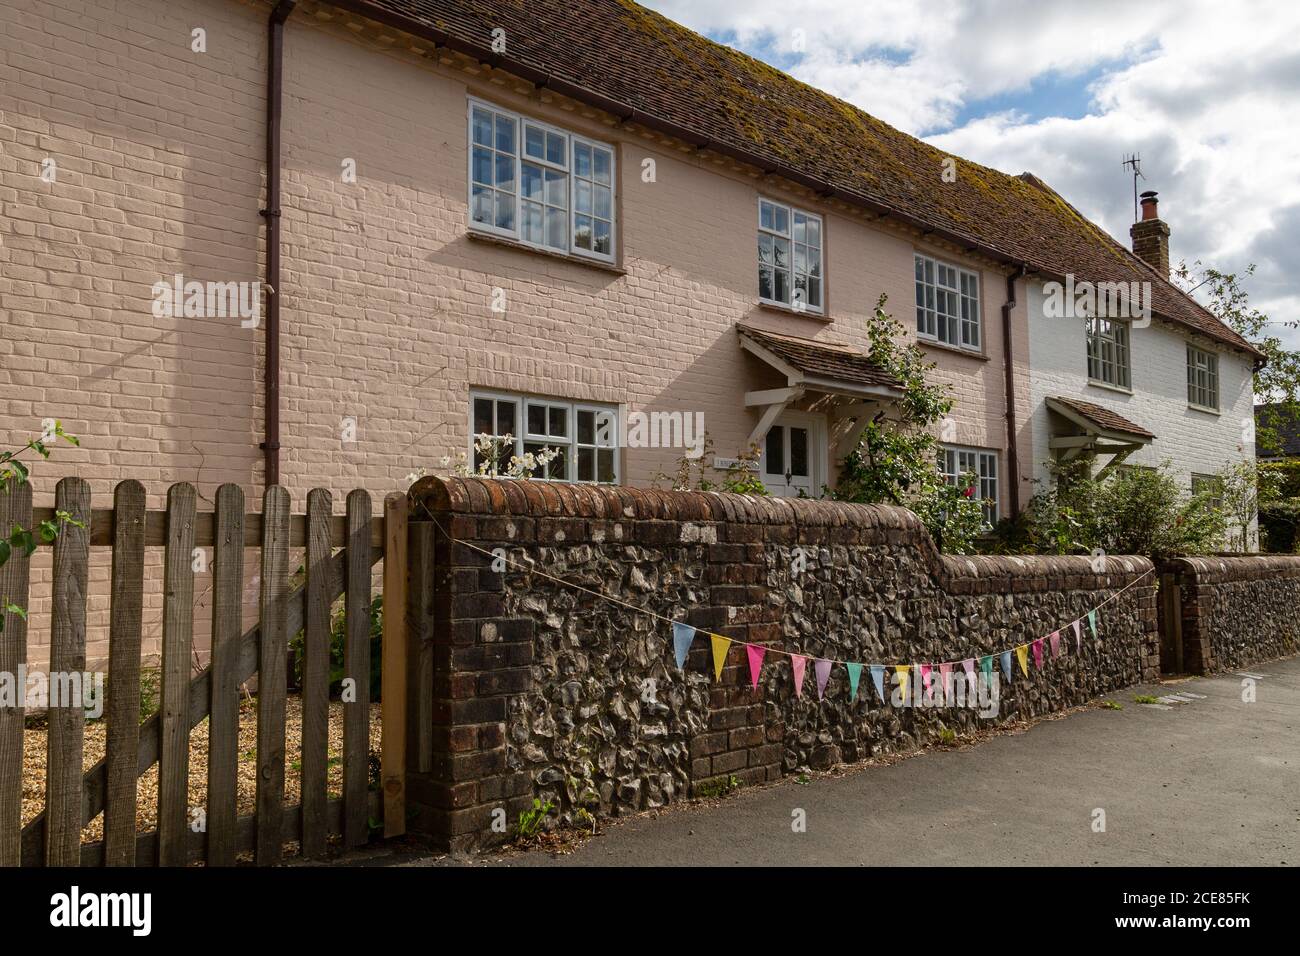 An English Country cottage with bunting hung on the wall outside, Hambledon hampshire, UK Stock Photo